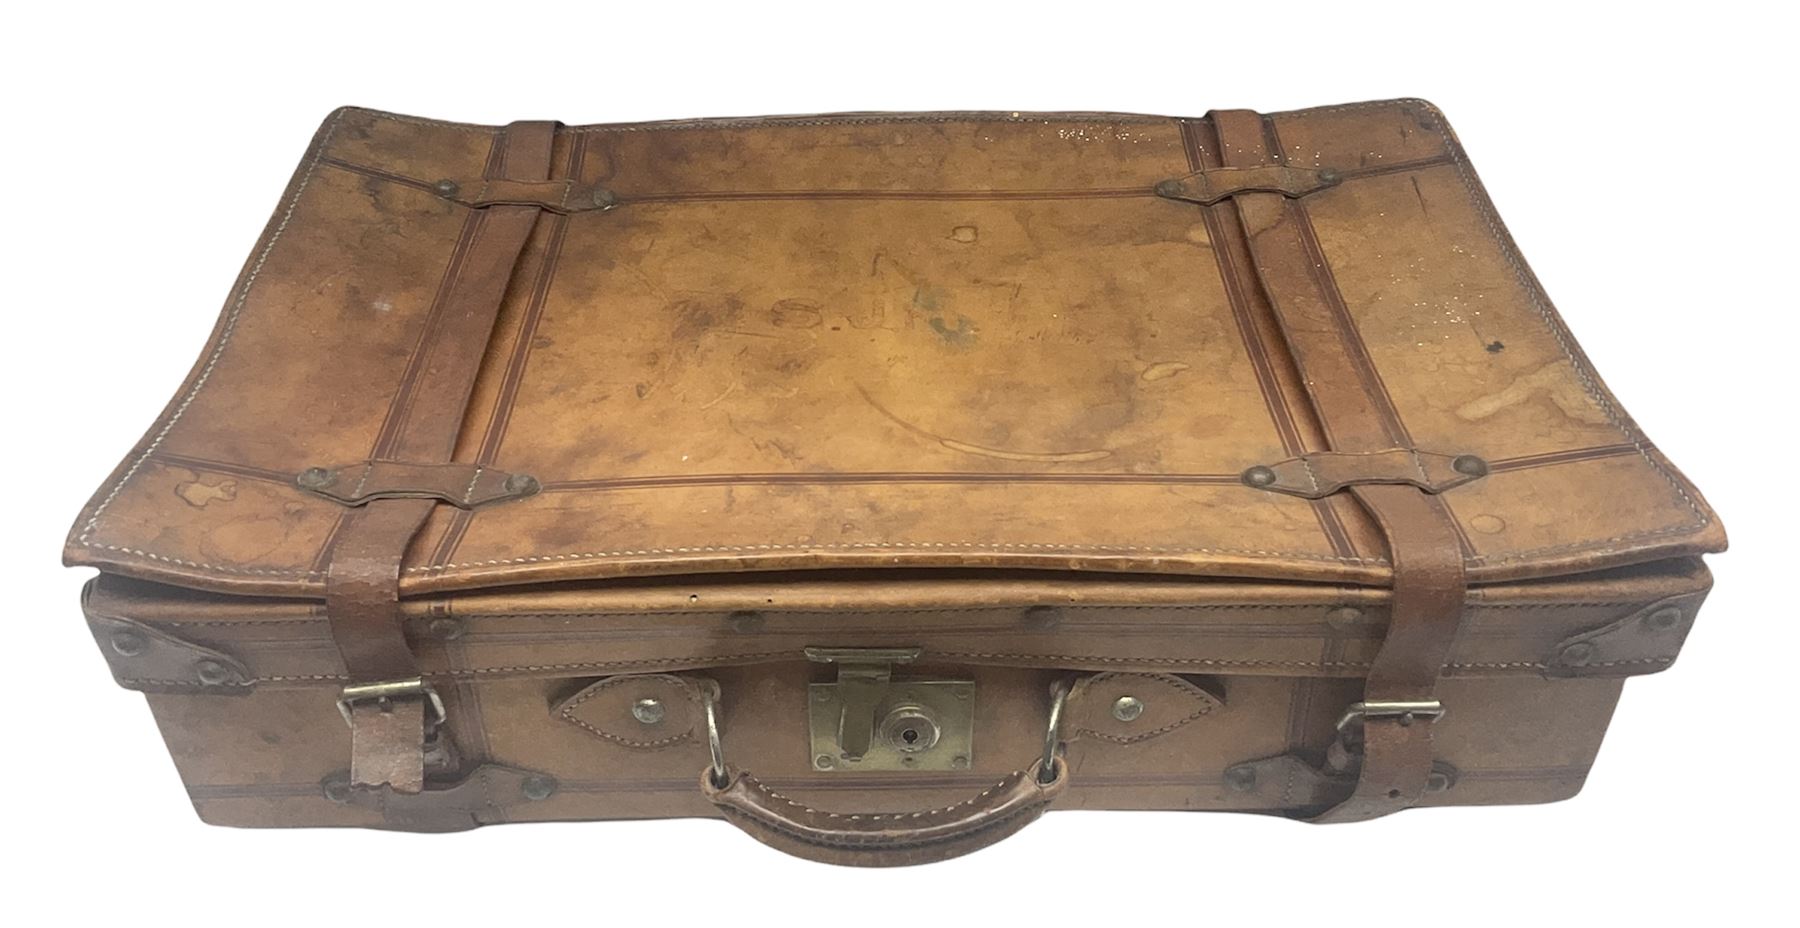 Late 19th/early 20th century stitched and studded leather portmanteau type suitcase with expanding l